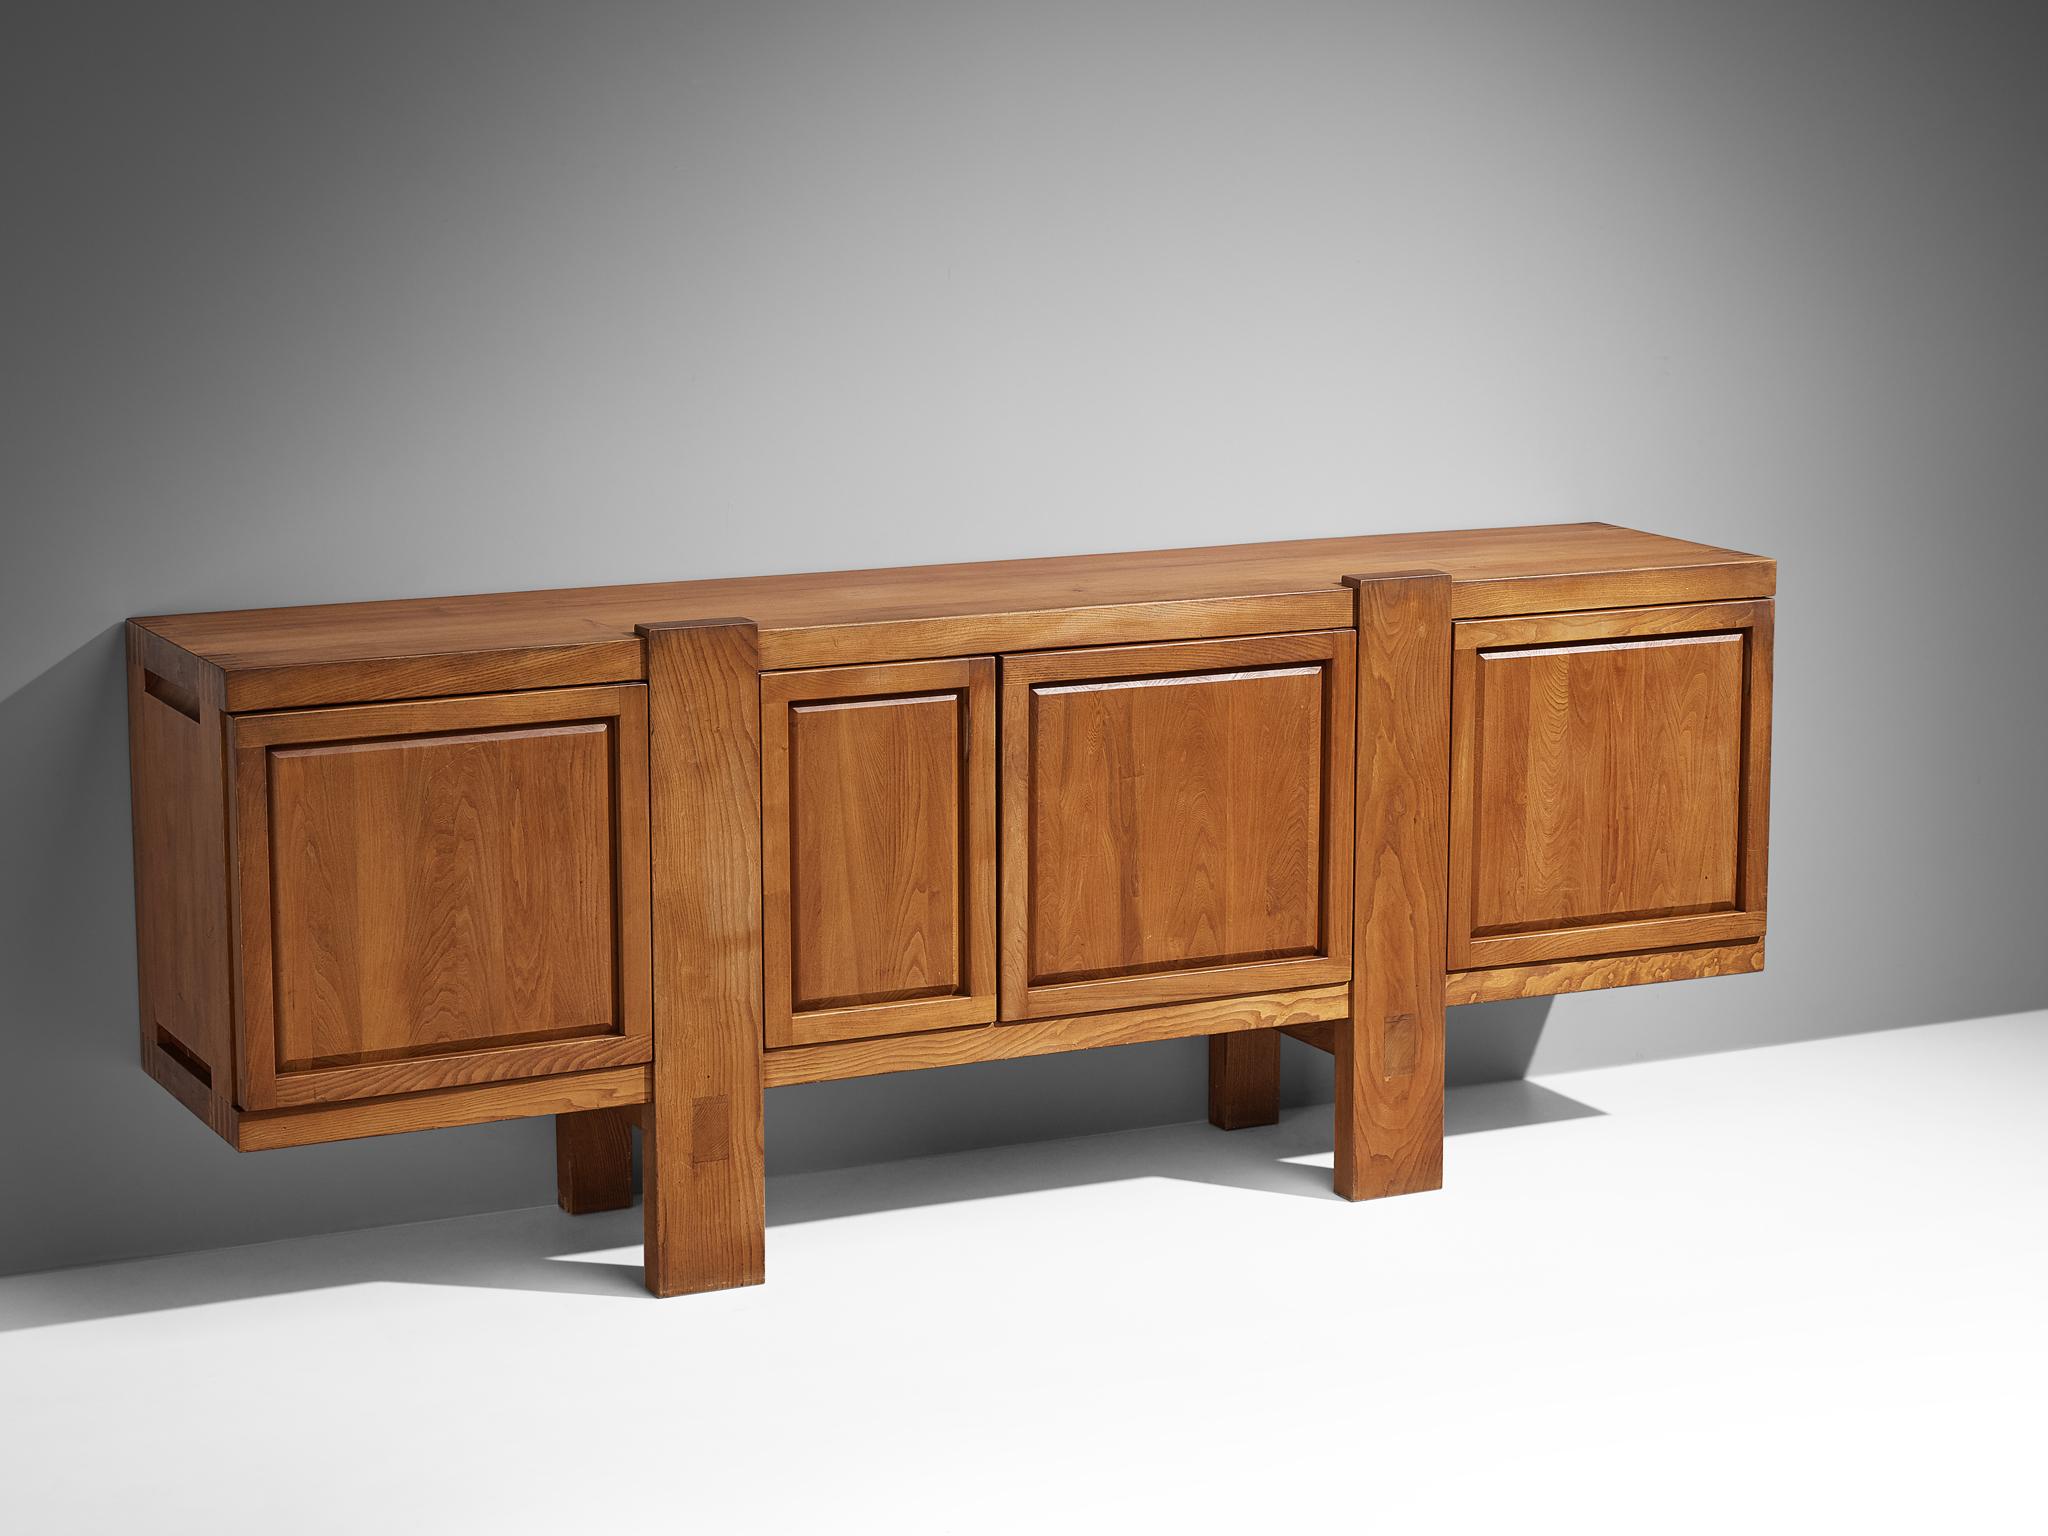 Pierre Chapo, sideboard model 'R16', elm, France, design 1966

This piece is one of the early editions designed by Pierre Chapo, known for his hallmark use of solid elmwood and a commitment to pure and clean design and construction principles. This